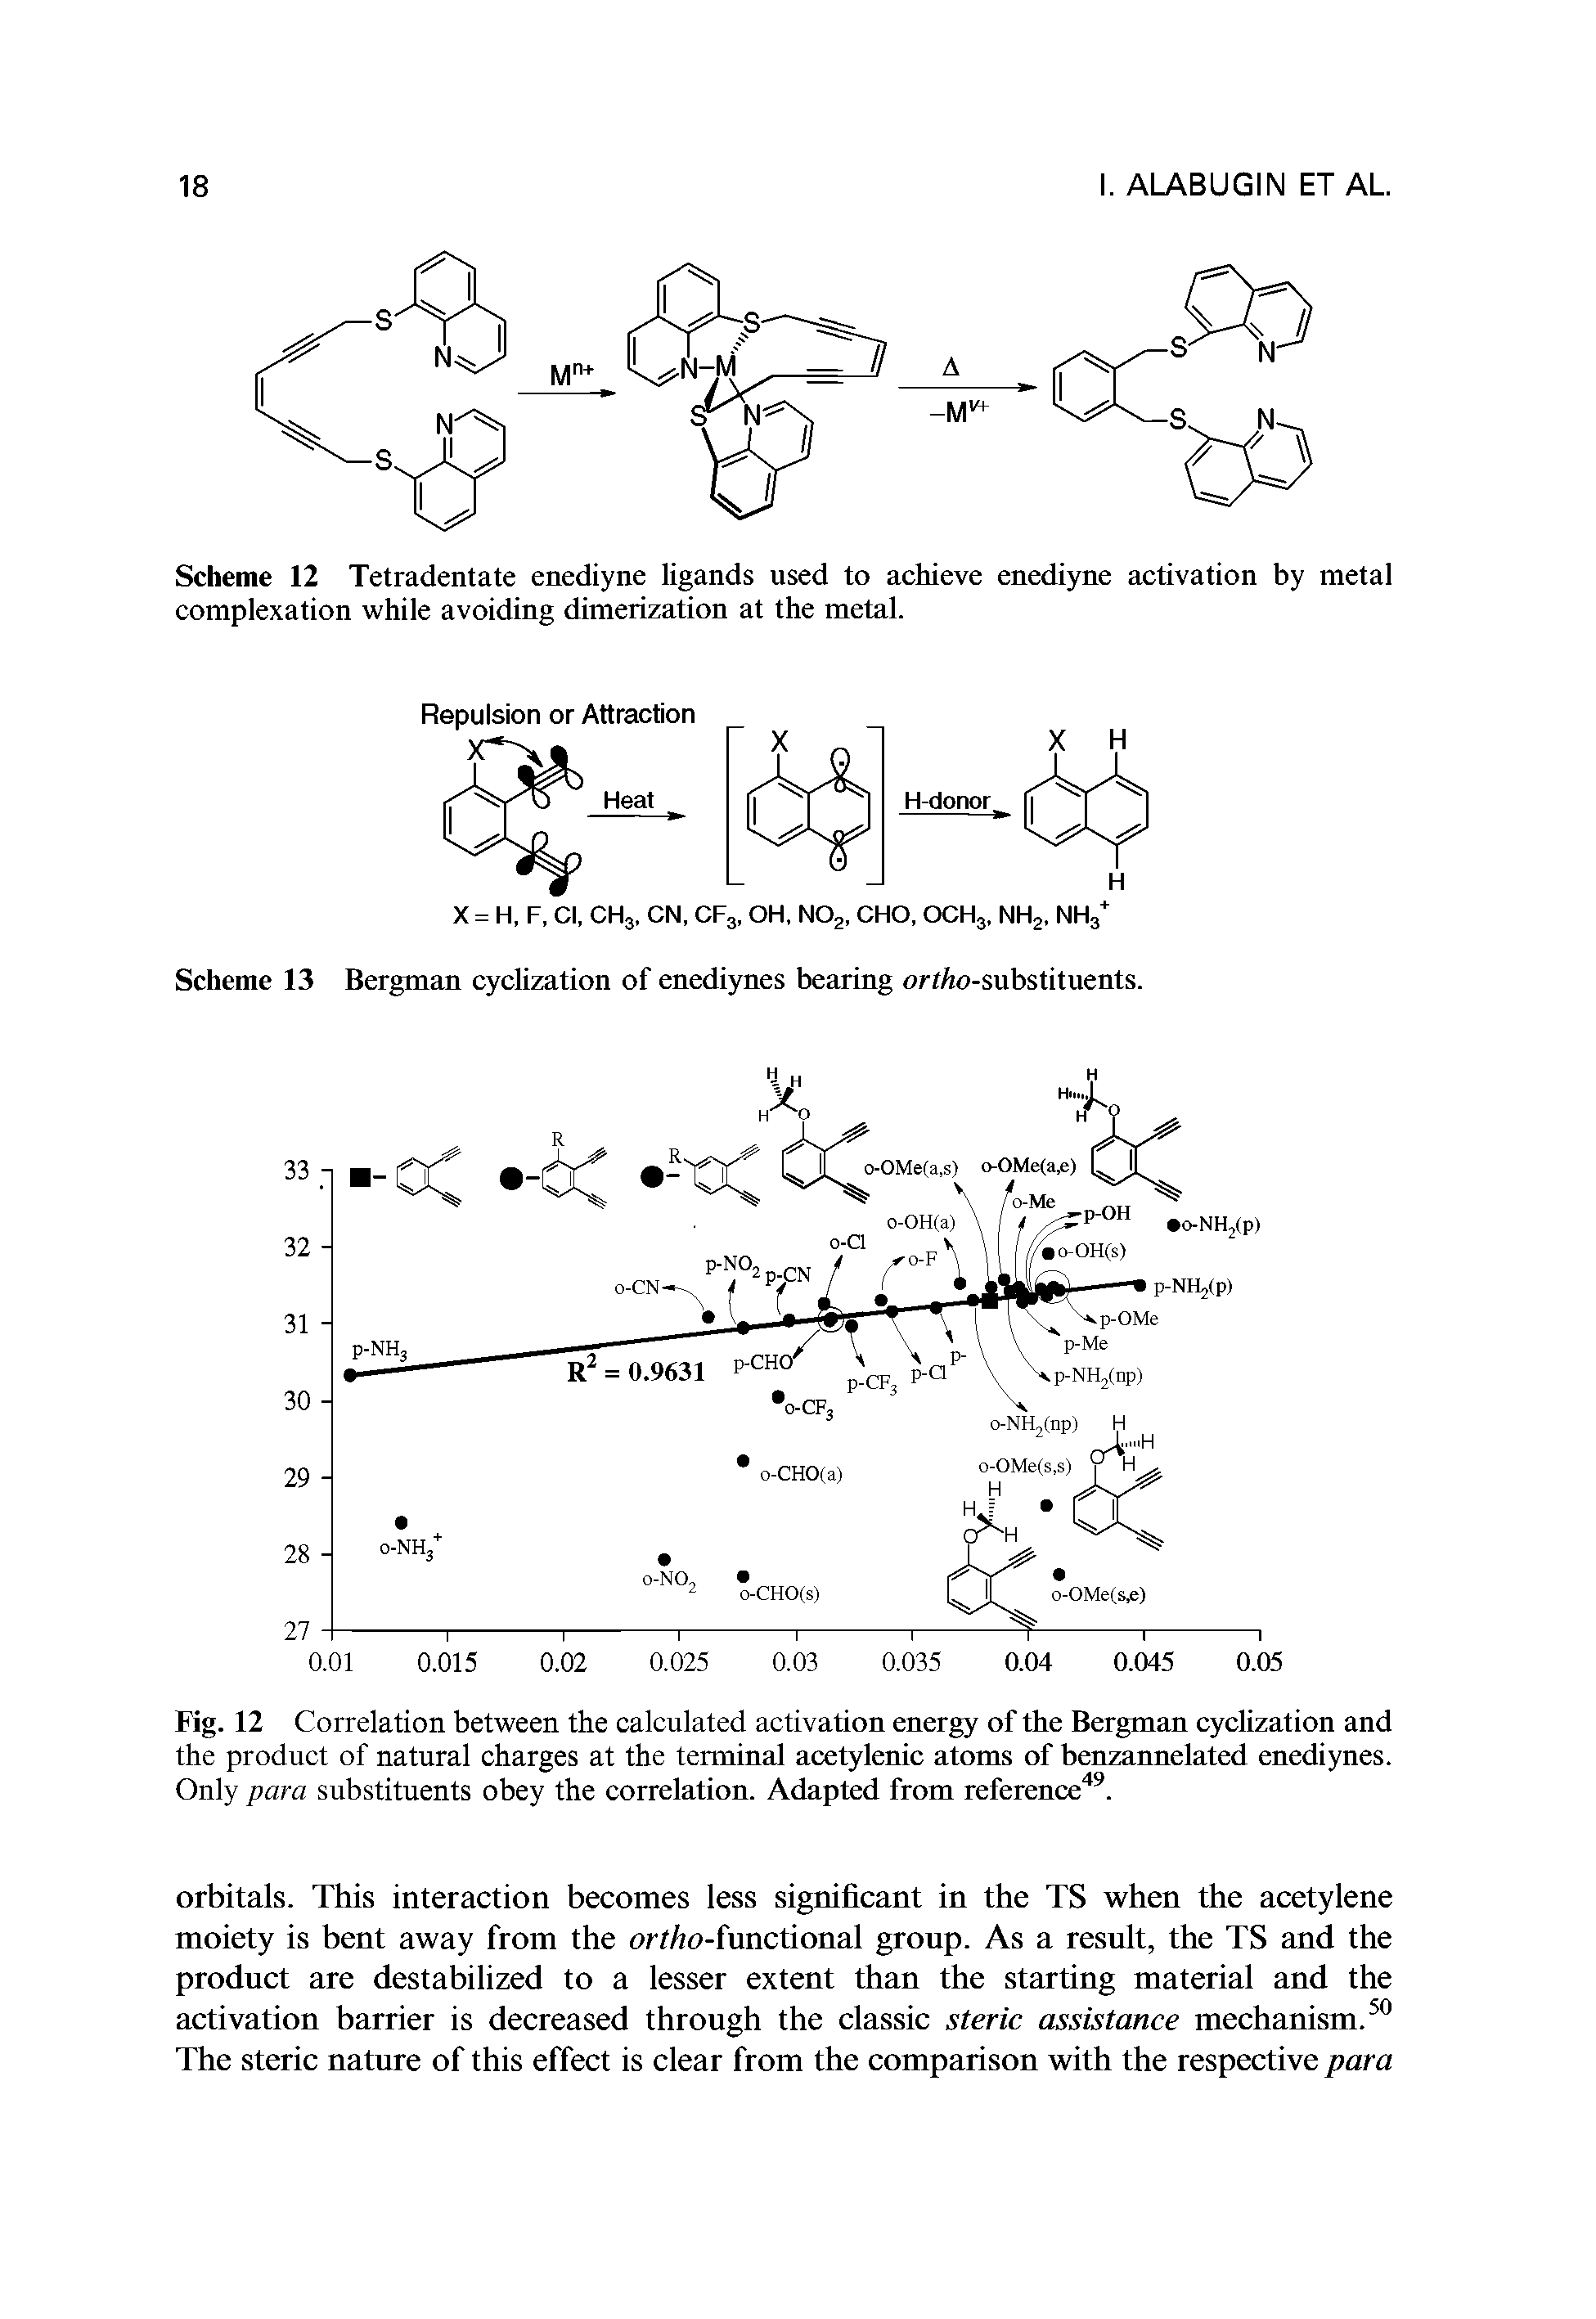 Fig. 12 Correlation between the calculated activation energy of the Bergman cyclization and the product of natural charges at the terminal acetylenic atoms of benzannelated enediynes. Only para substituents obey the correlation. Adapted from reference49.